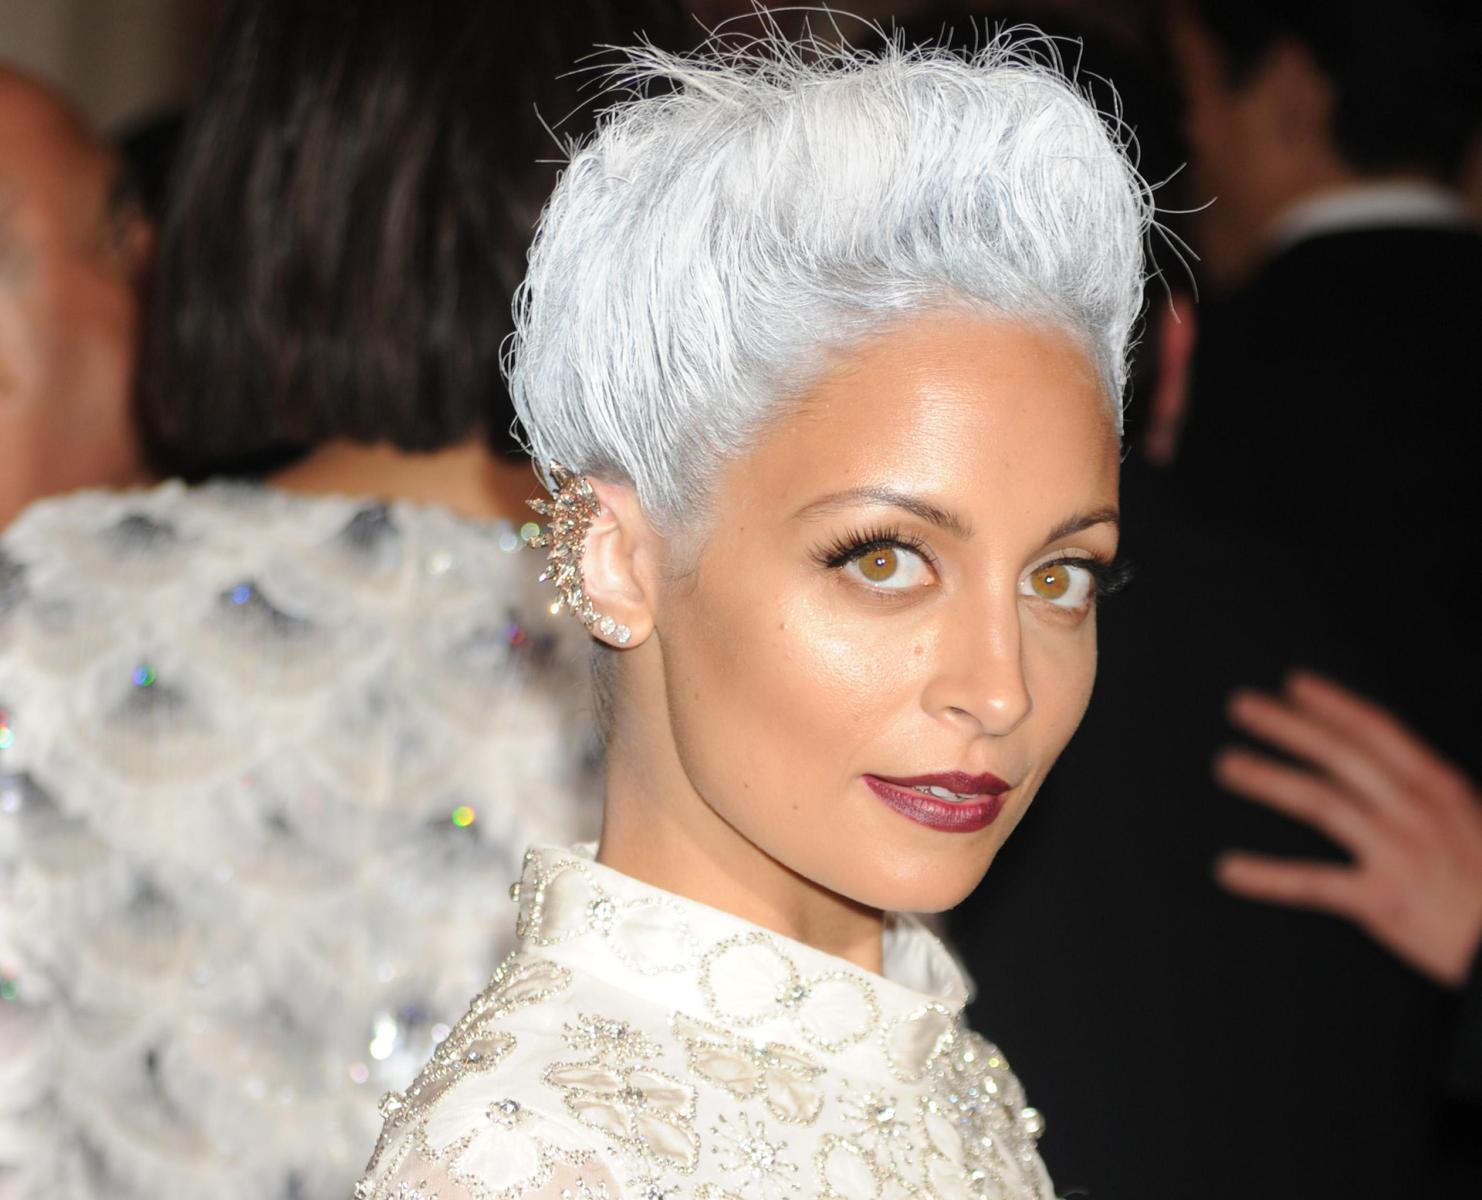 From Blue to Green: 6 Celebrity Hair Transformations That Will Make Your Jaw Drop - image 5